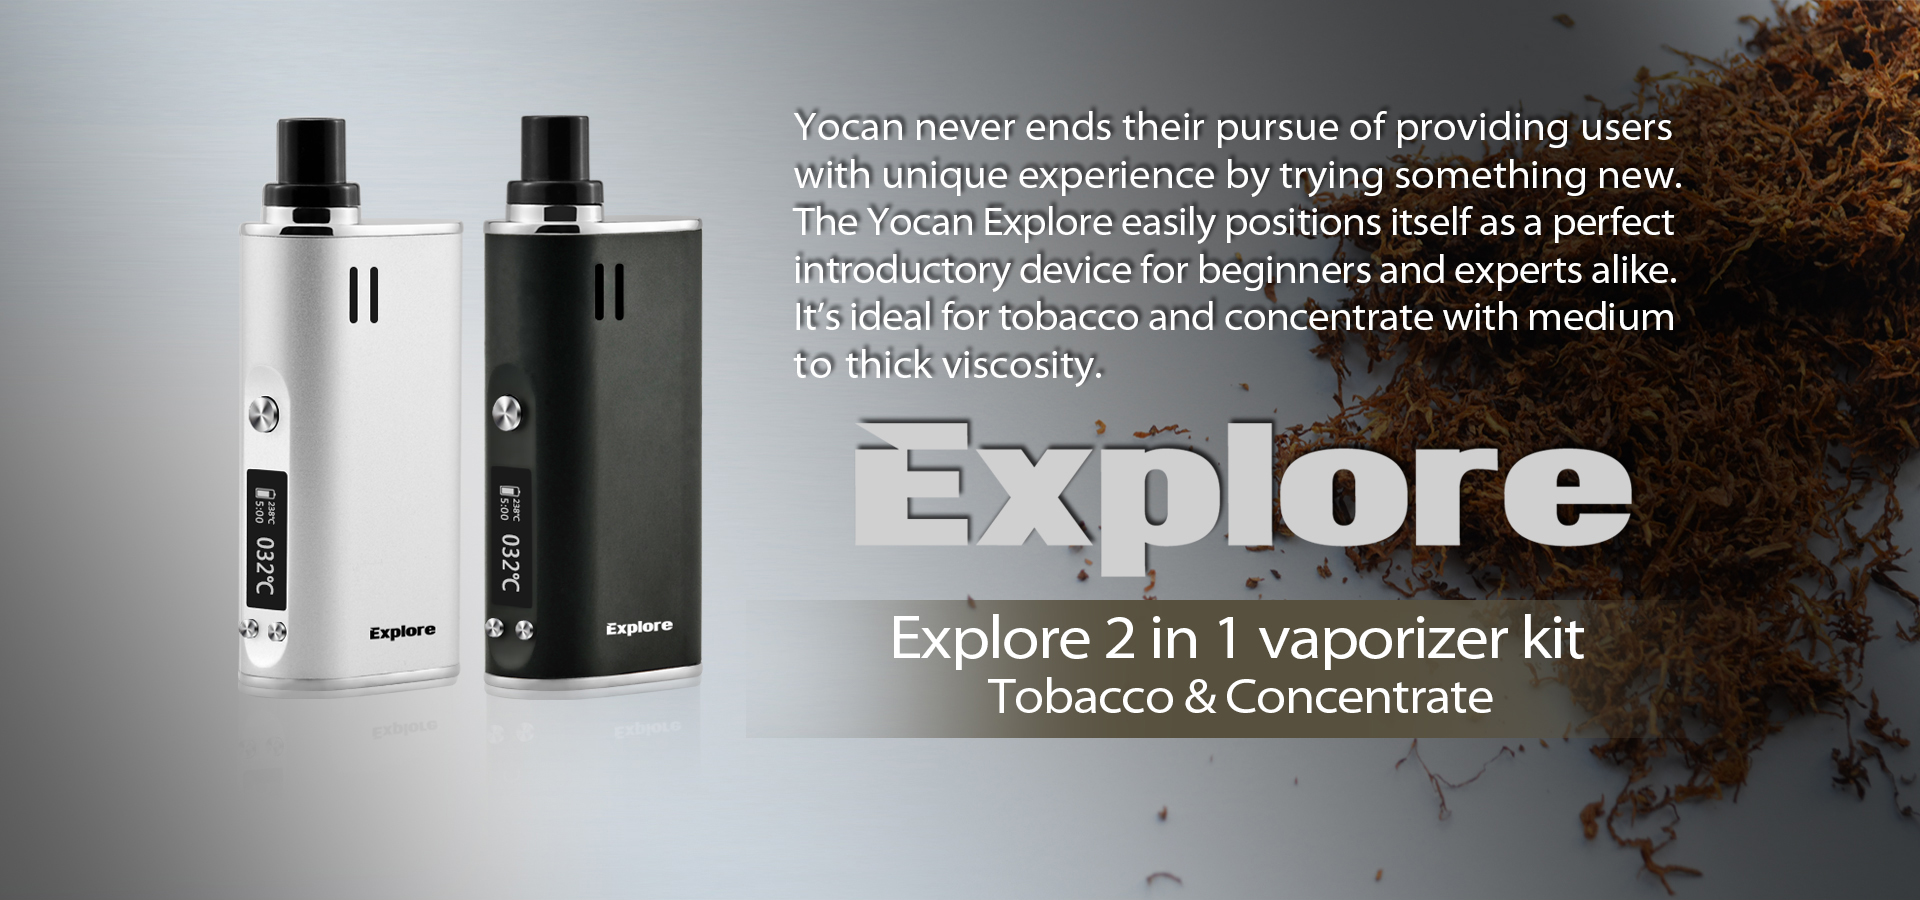 The Yocan Explore is a 2-in-1 Multi-vaporizer, Wax and Dry Vaporizer Kit features precise temperature control and a ceramic vapor path.